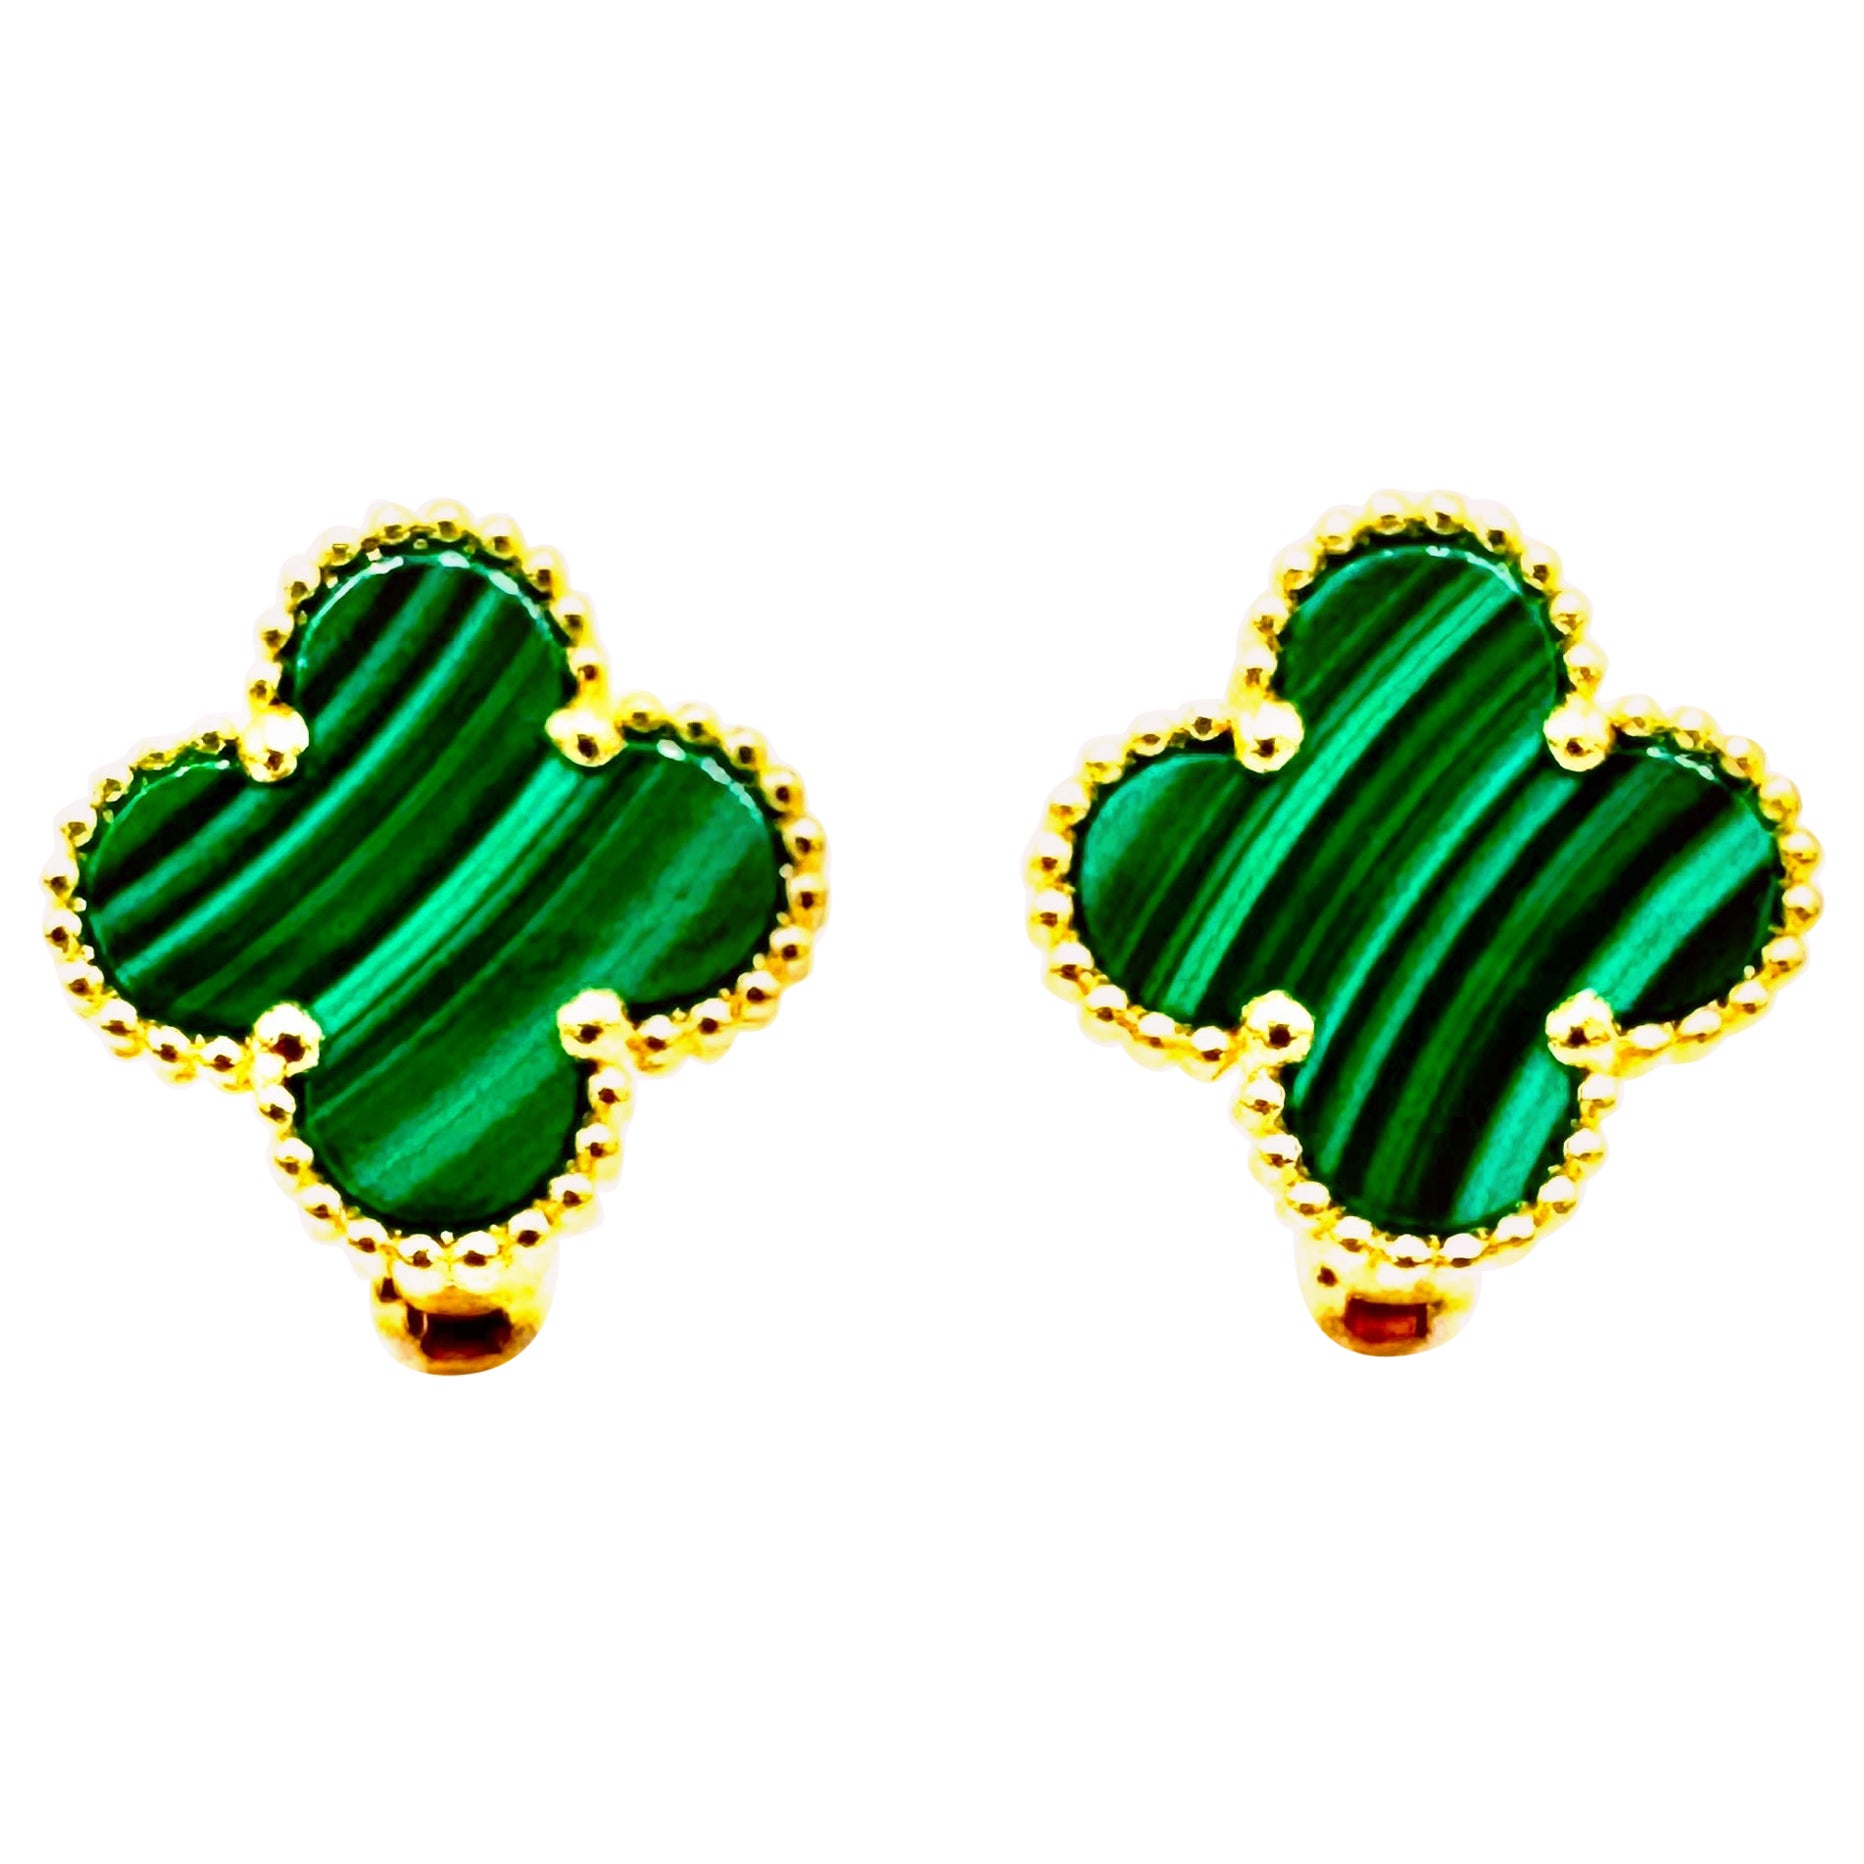 What is the green stone on Van Cleef & Arpels jewelry?